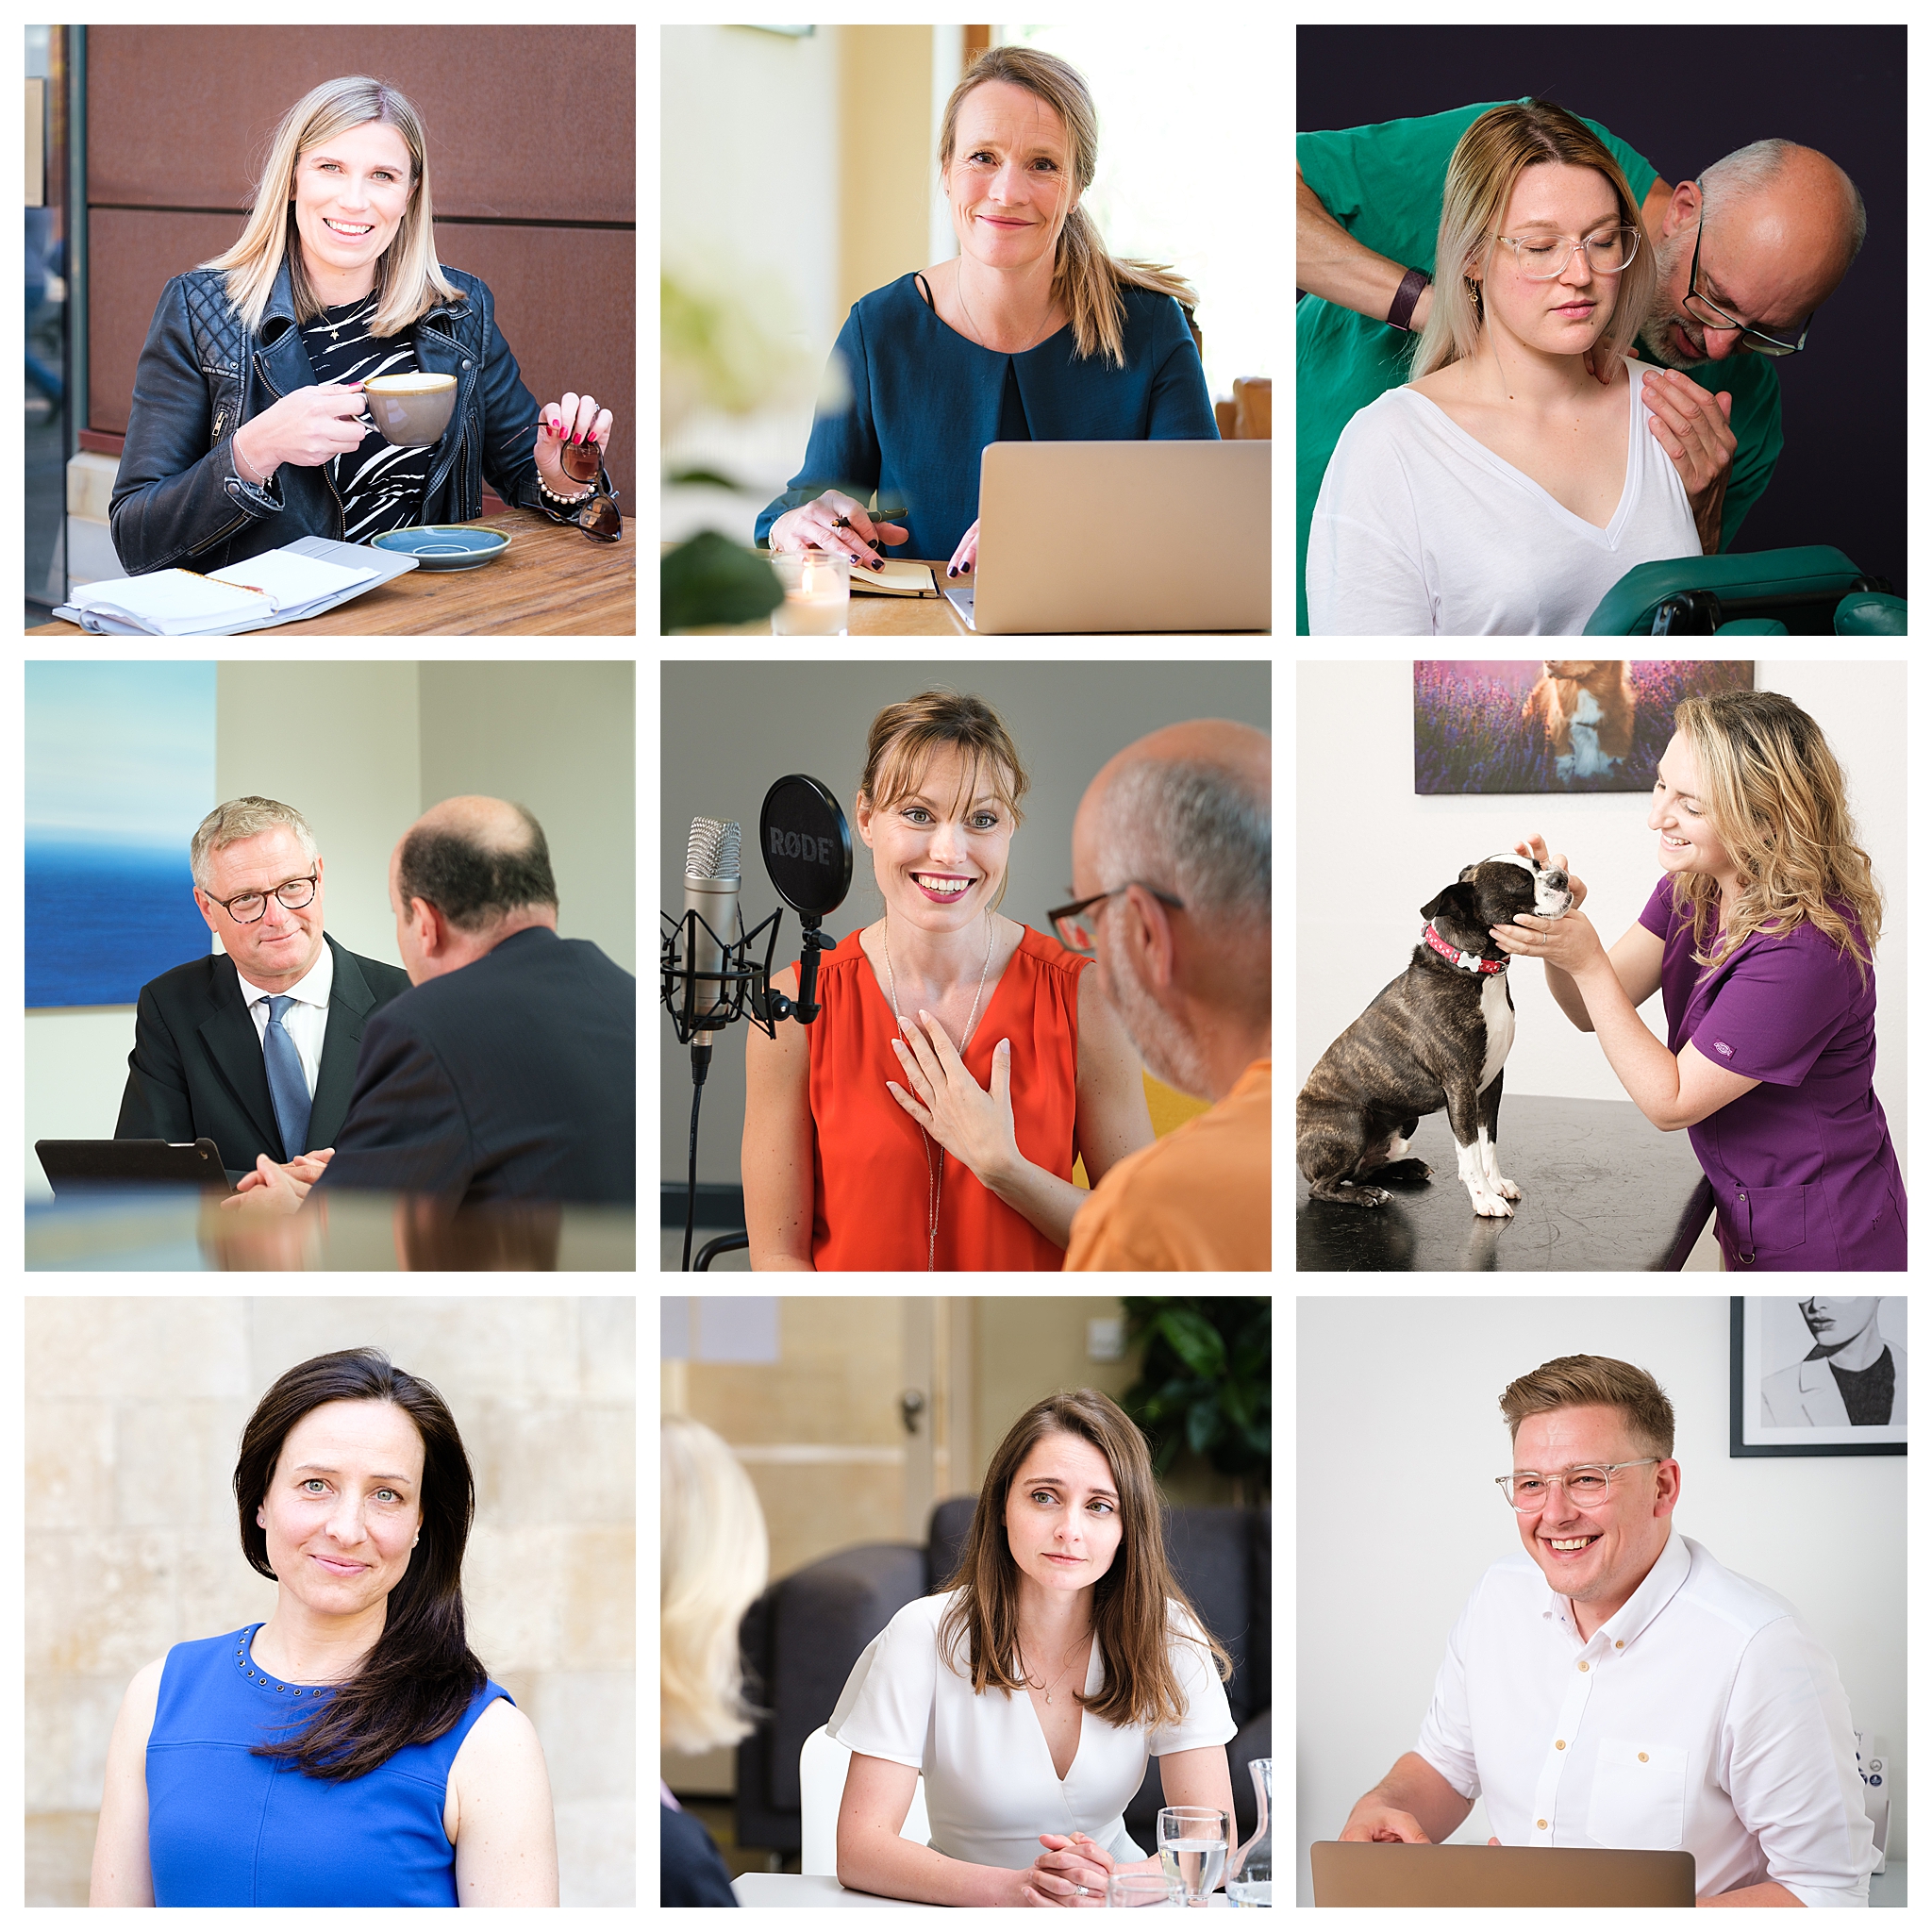 Business photography collage with images of men and women looking confident and representing their business